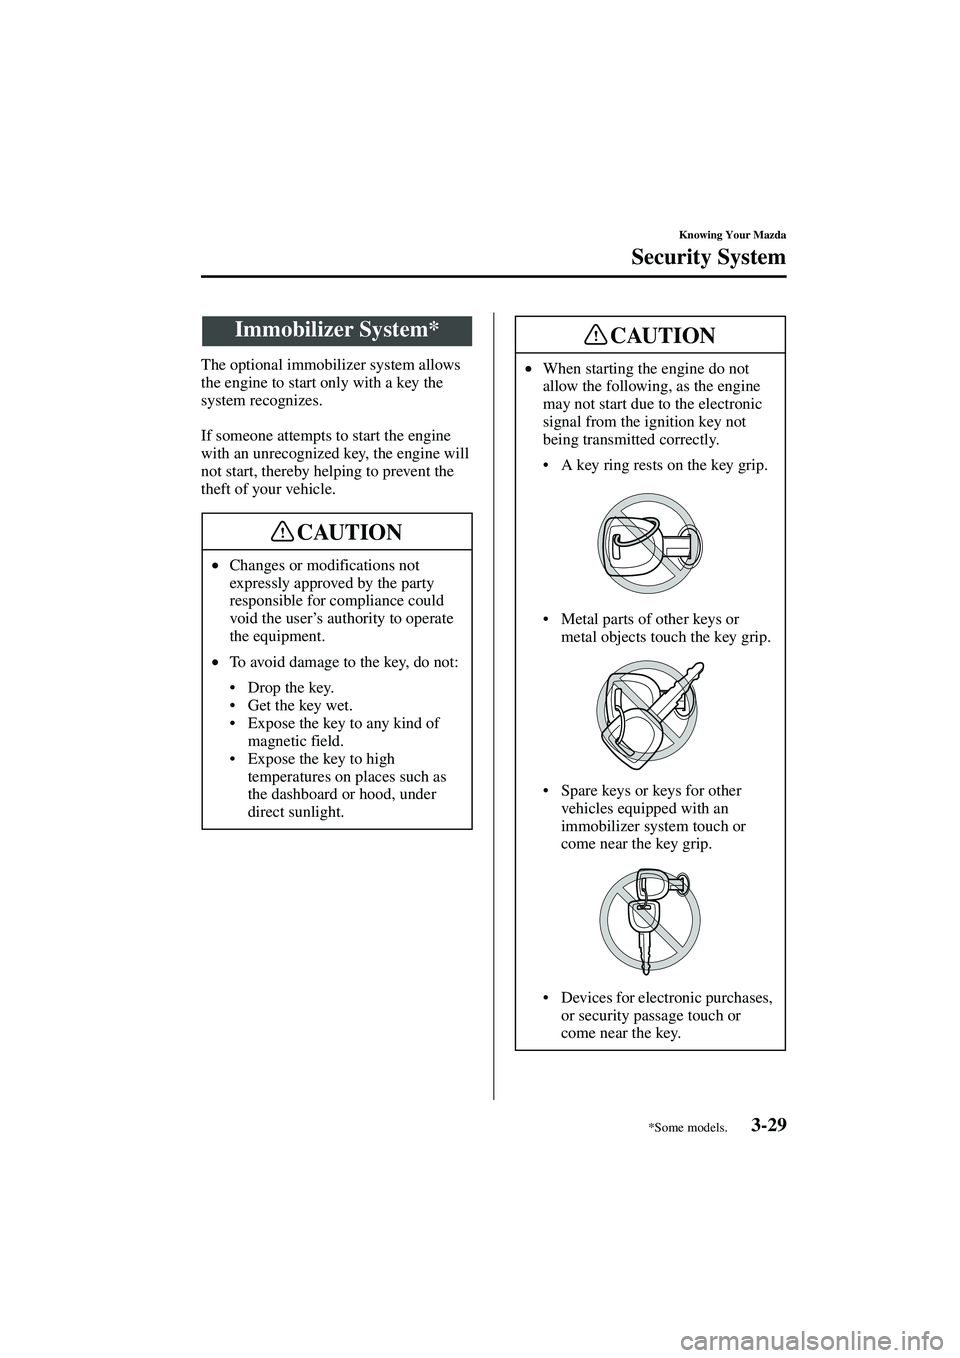 MAZDA MODEL MX-5 MIATA 2004 Repair Manual 3-29
Knowing Your Mazda
Form No. 8S15-EA-03G
Security System
The optional immobilizer system allows 
the engine to start only with a key the 
system recognizes.
If someone attempts to start the engine